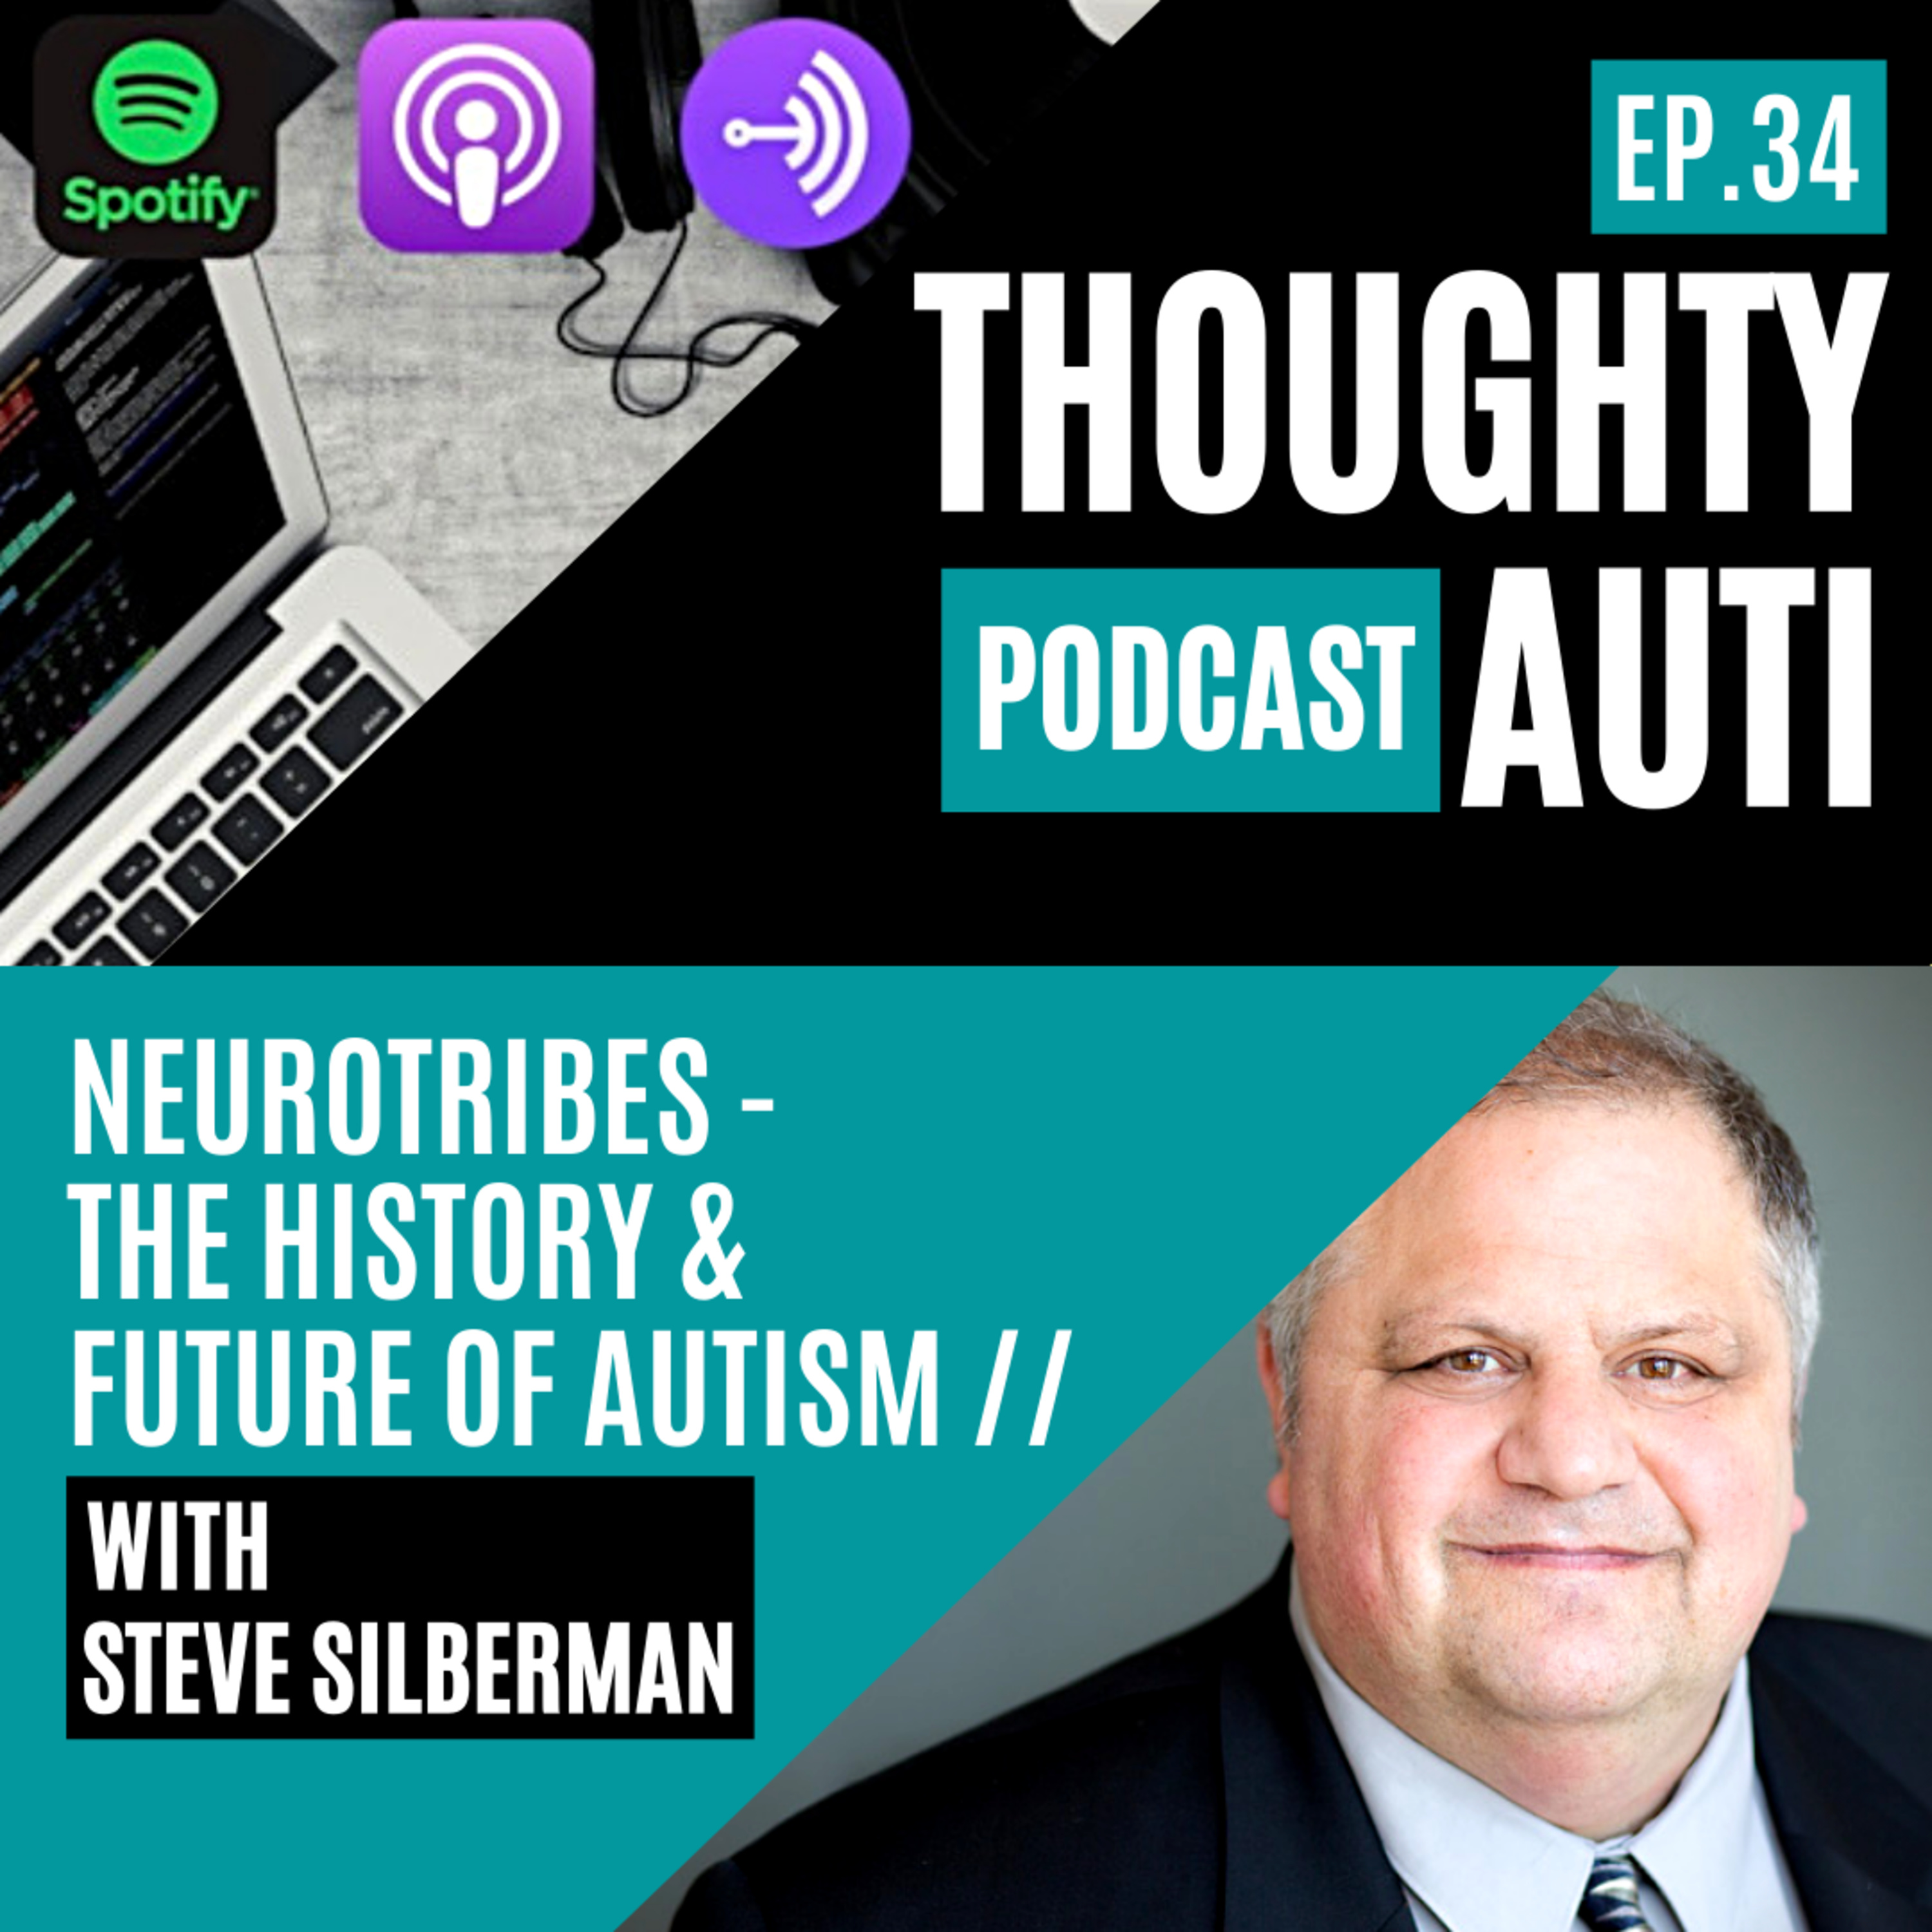 Neurotribes - The History & Future Of Autism w/ Steve Silberman